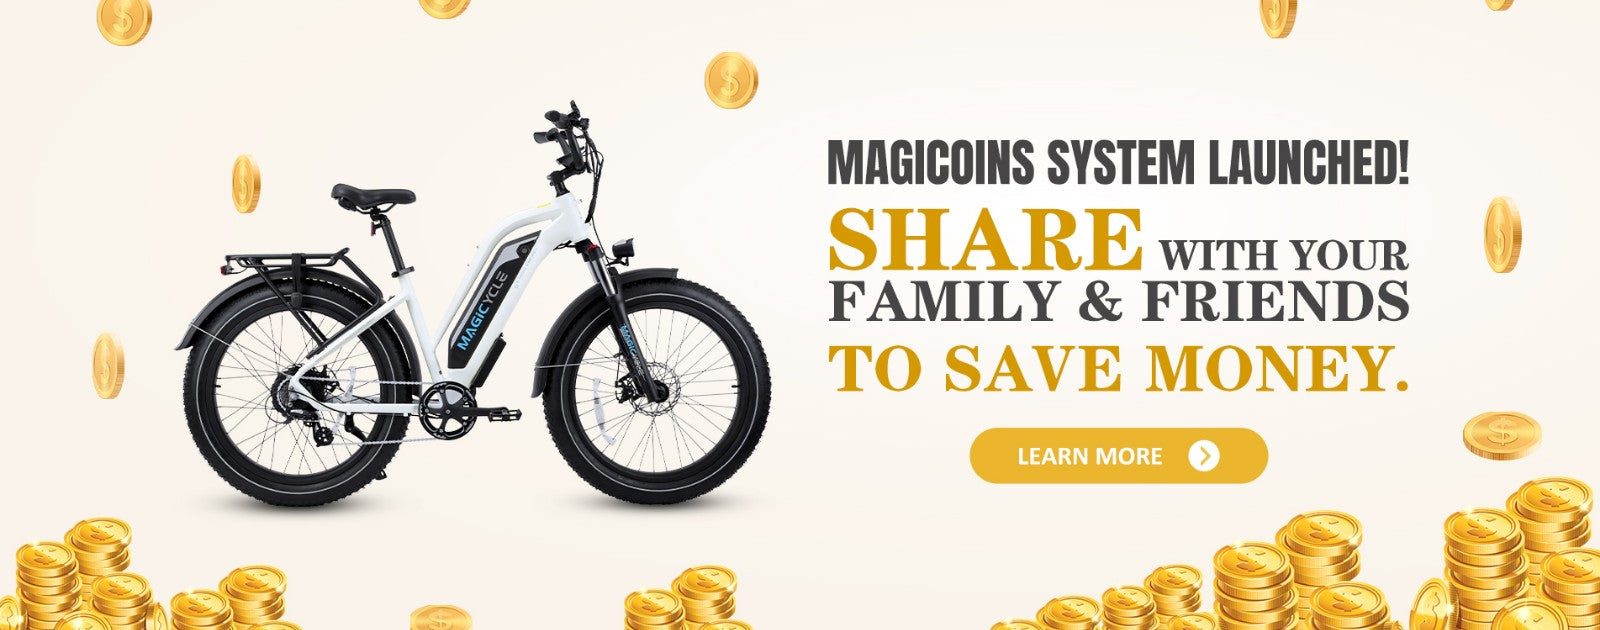 magicycle magicoins system launched